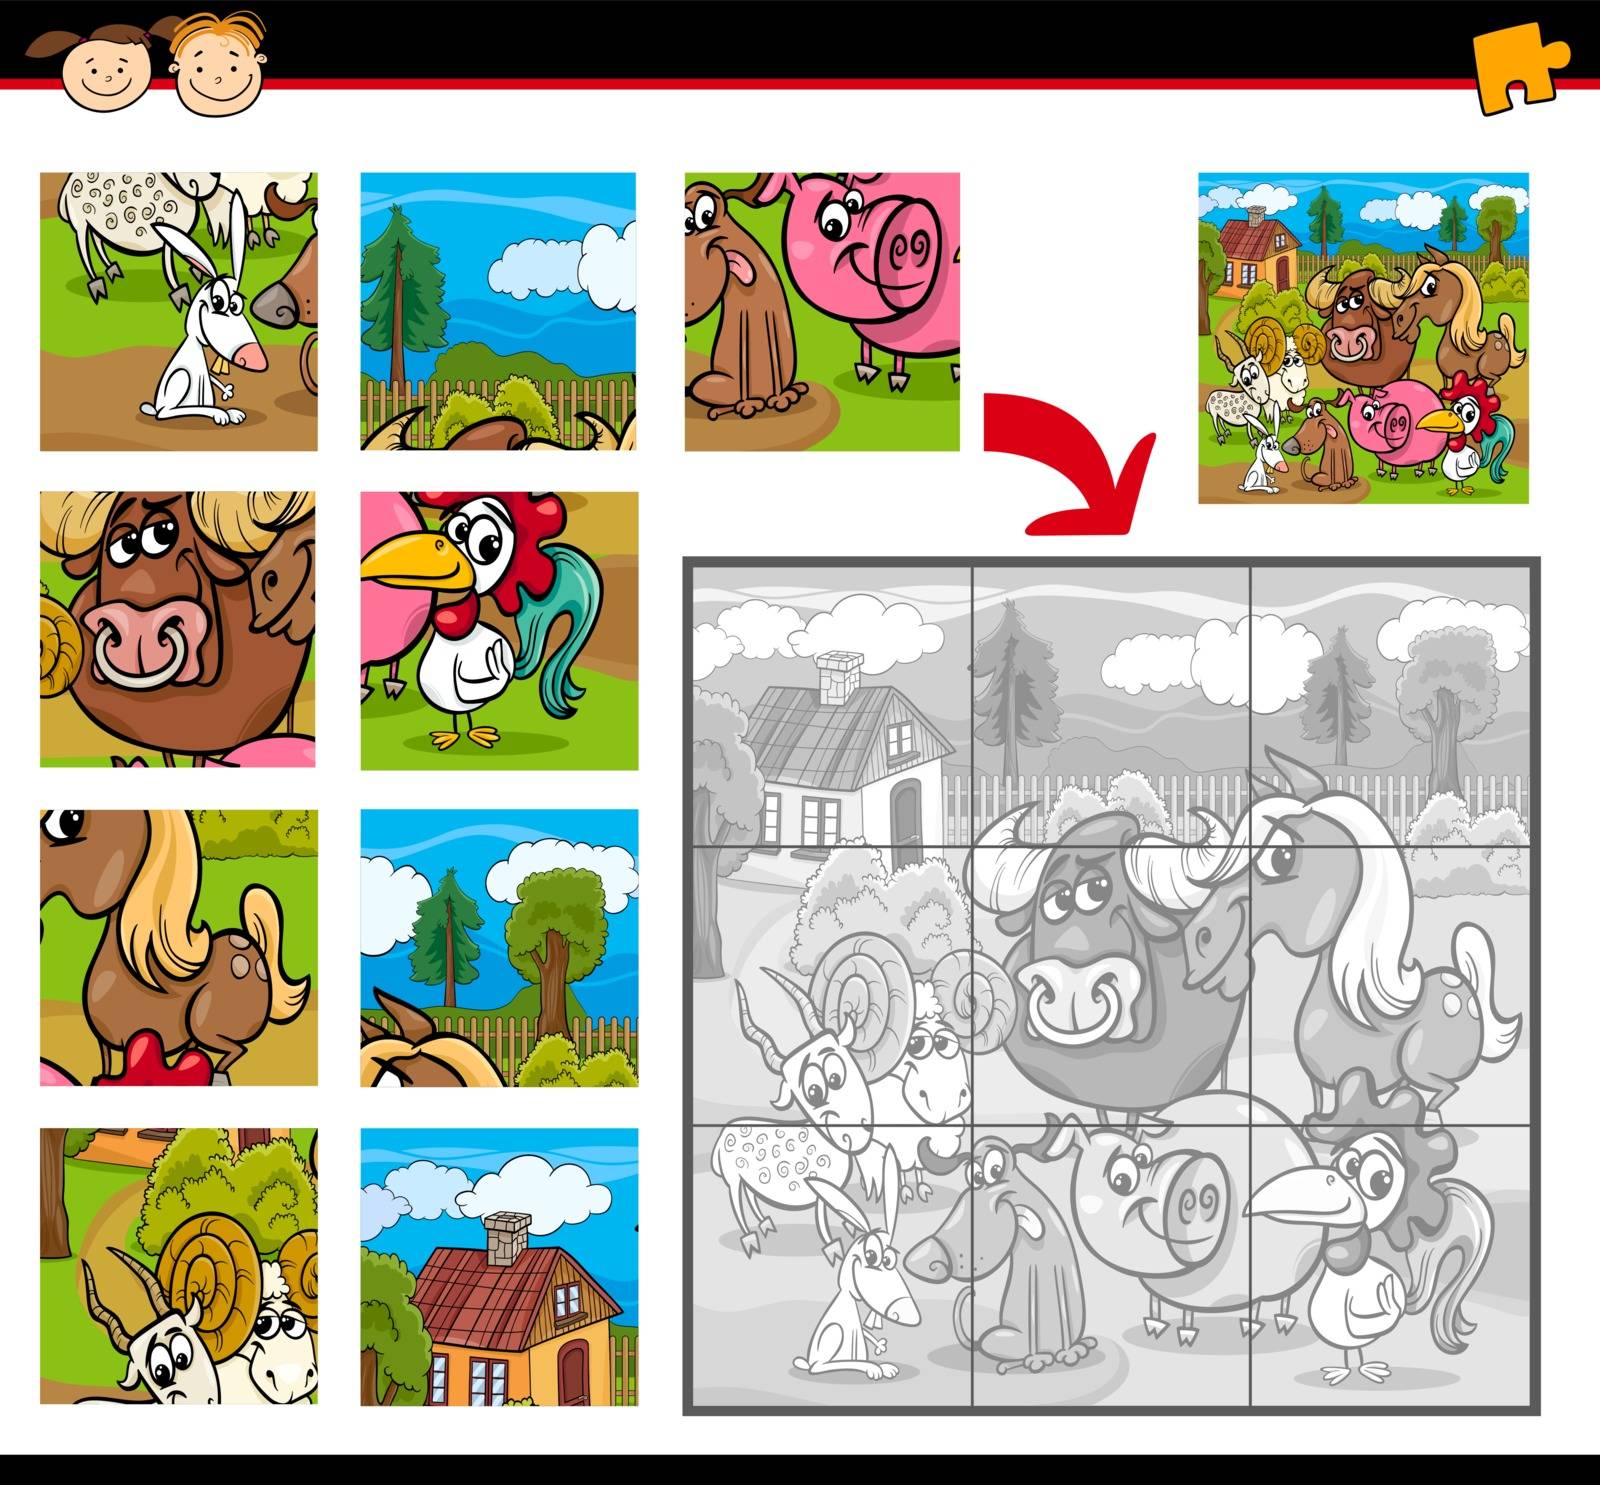 Cartoon Illustration of Education Jigsaw Puzzle Game for Preschool Children with Farm Animals Characters Group